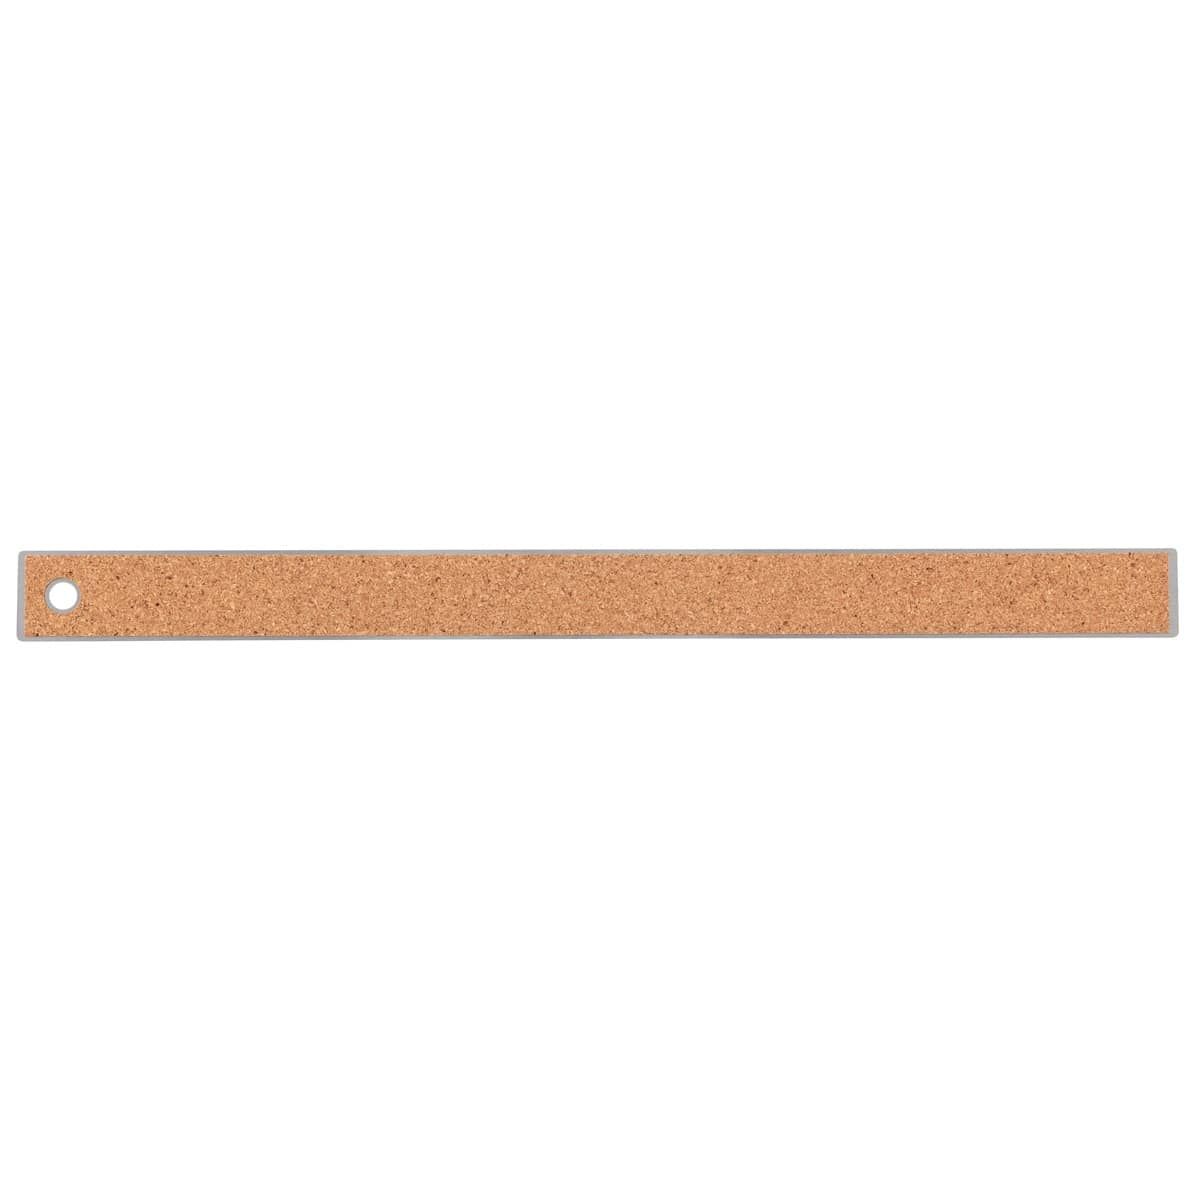 Acurit Stainless Steel Rulers Non-Slip Cork Backing